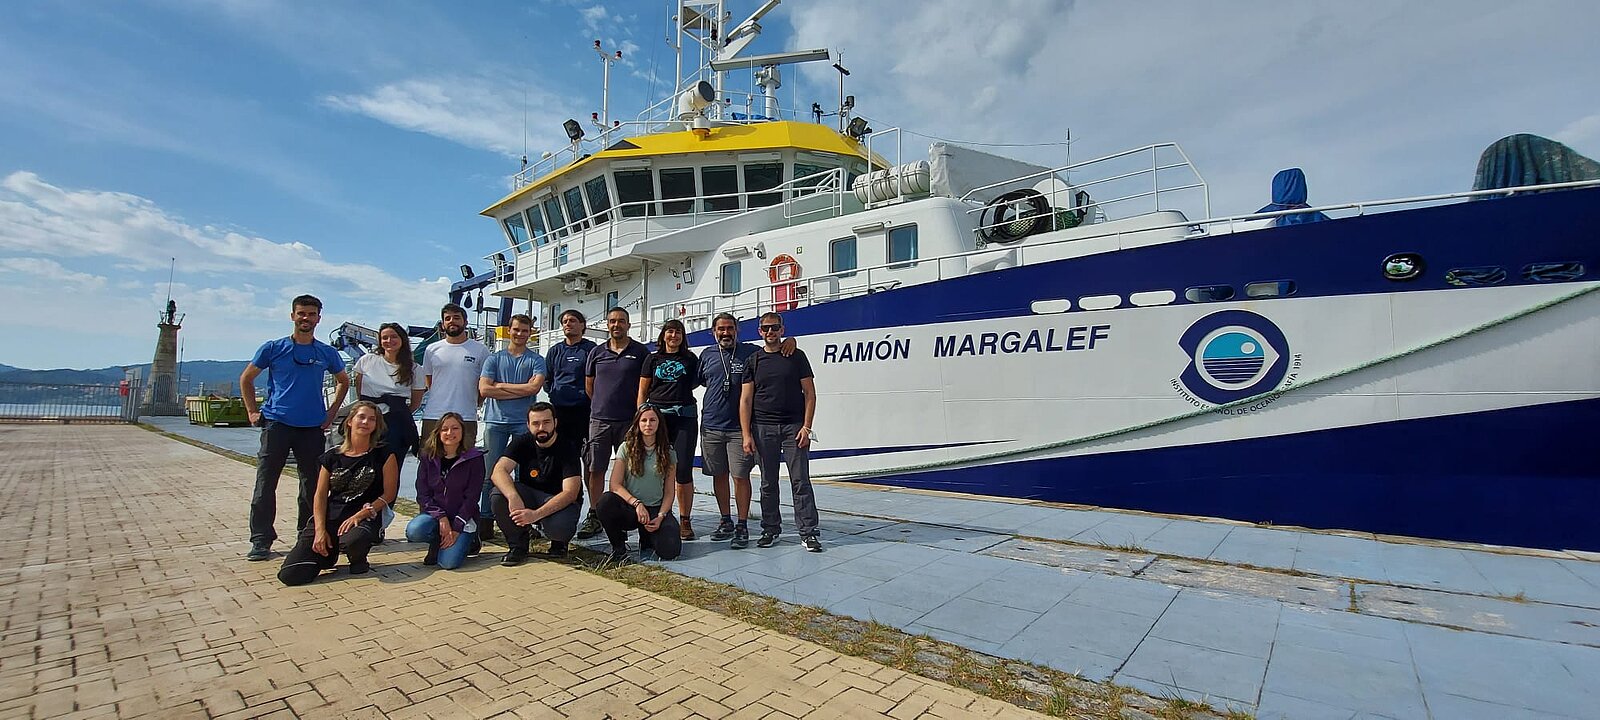 SCANS-IV Ship survey team in front of the research vessel